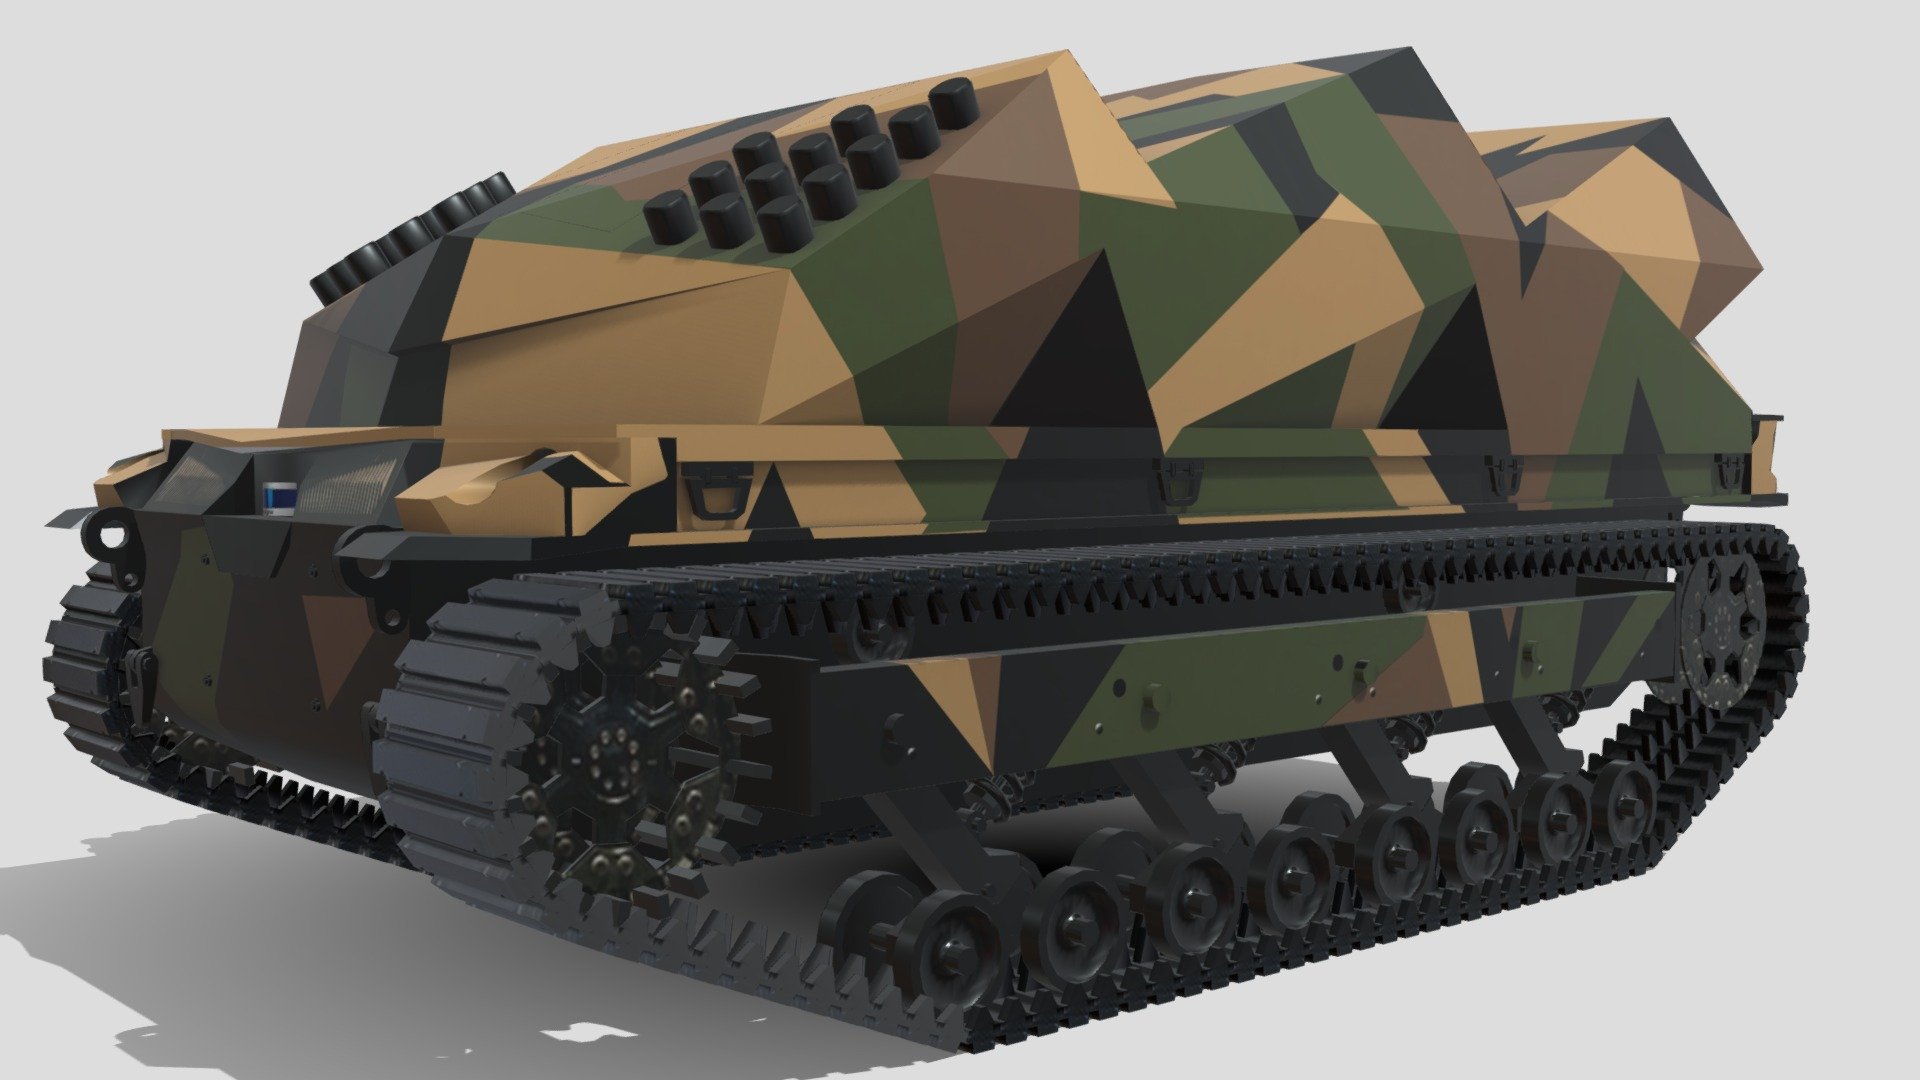 https://www.gd.com/Articles/2021/10/06/general-dynamics-at-ausa-2021

The model uses the optimal number of polygons for light situational scenes, traffic simulation. 
PSD texture for livery change (includes base white background and details) On request.

The license type is set by sketchfab. If you need a standard license - tell me about it 3d model